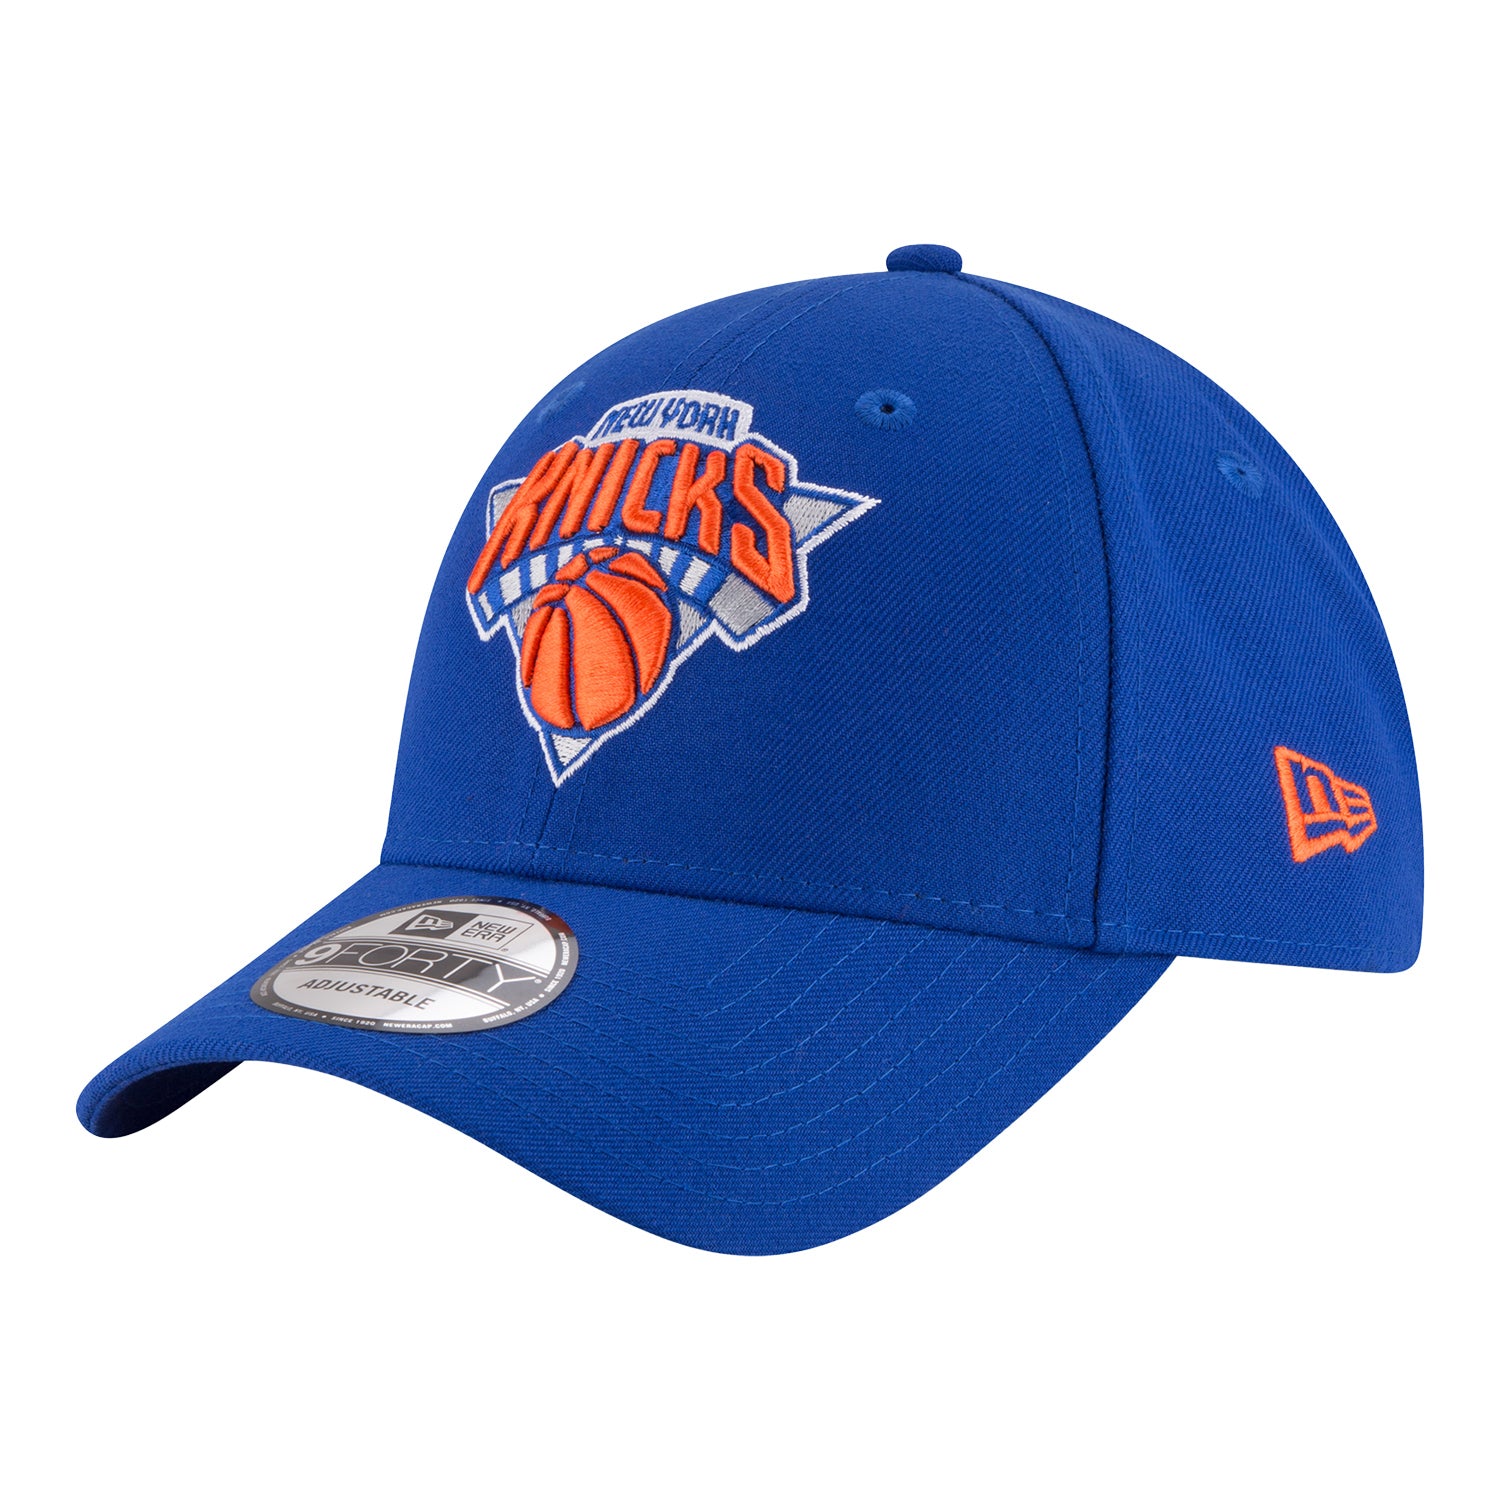 Youth New Era Knicks Royal 9Forty Hat – Shop Madison Square Garden